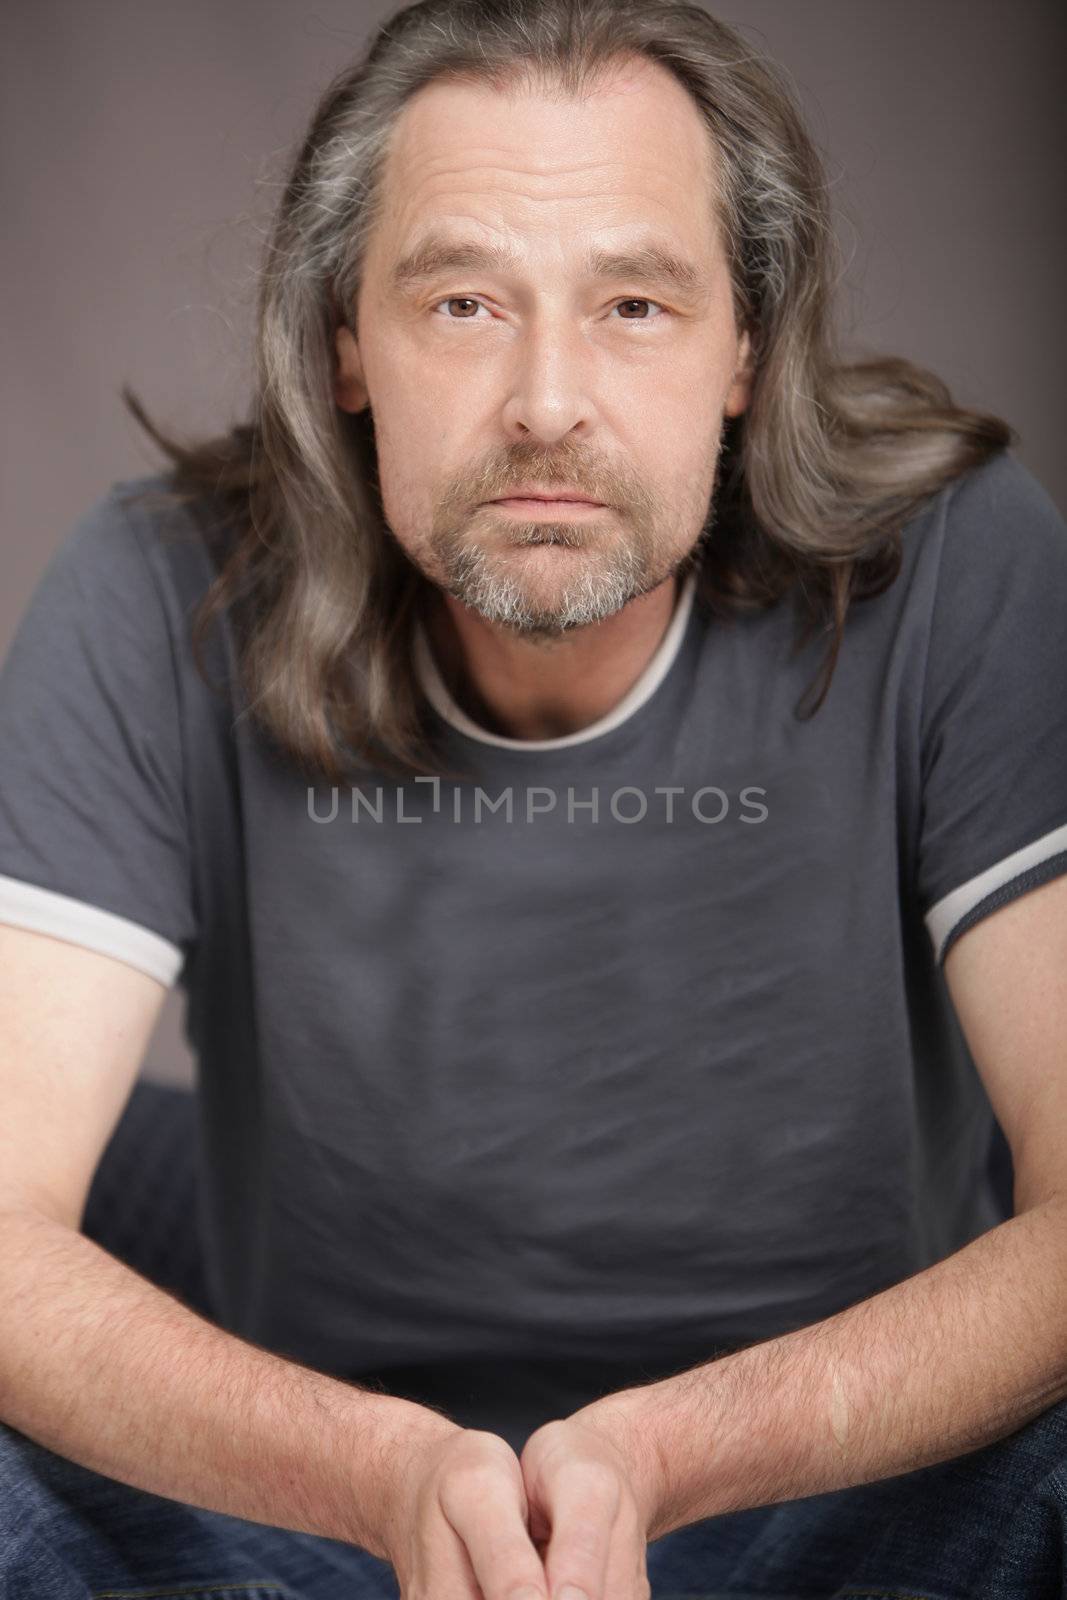 Attractive middle-aged man with a beard and long hair sitting in a chair facing the camera with a serious expression